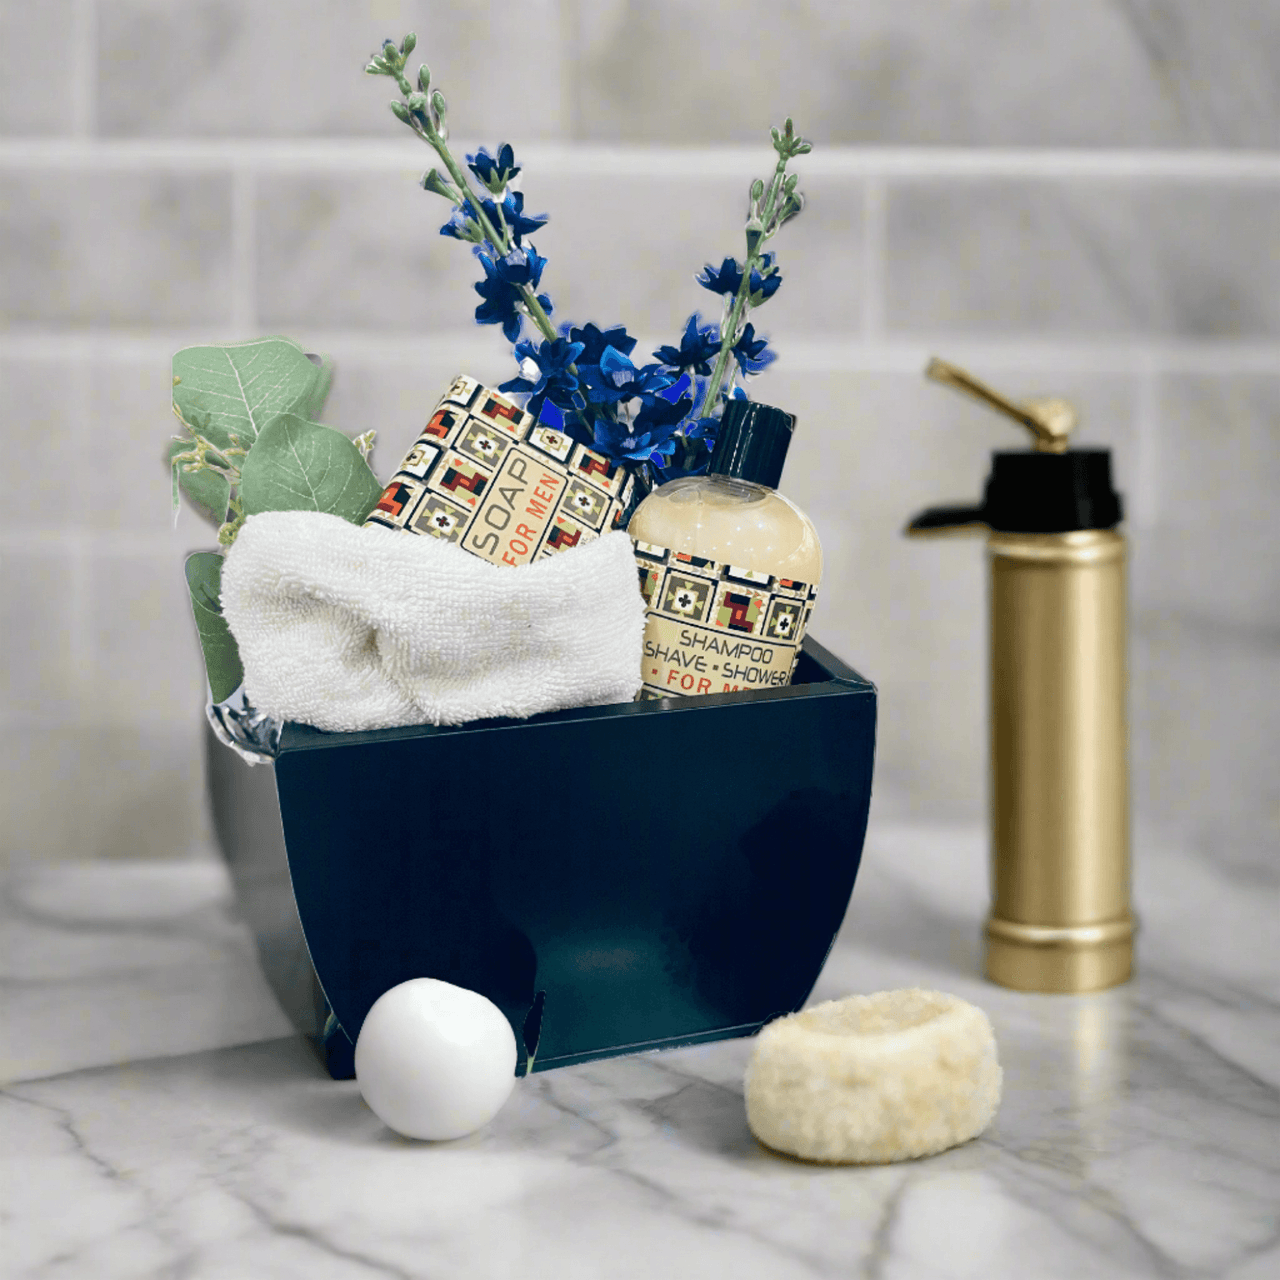 Stylish personal care essentials: navy storage bin, plush towel, dried flowers, and grooming tools - a thoughtful Mens Shower Vase gift set from Essentialgifting.